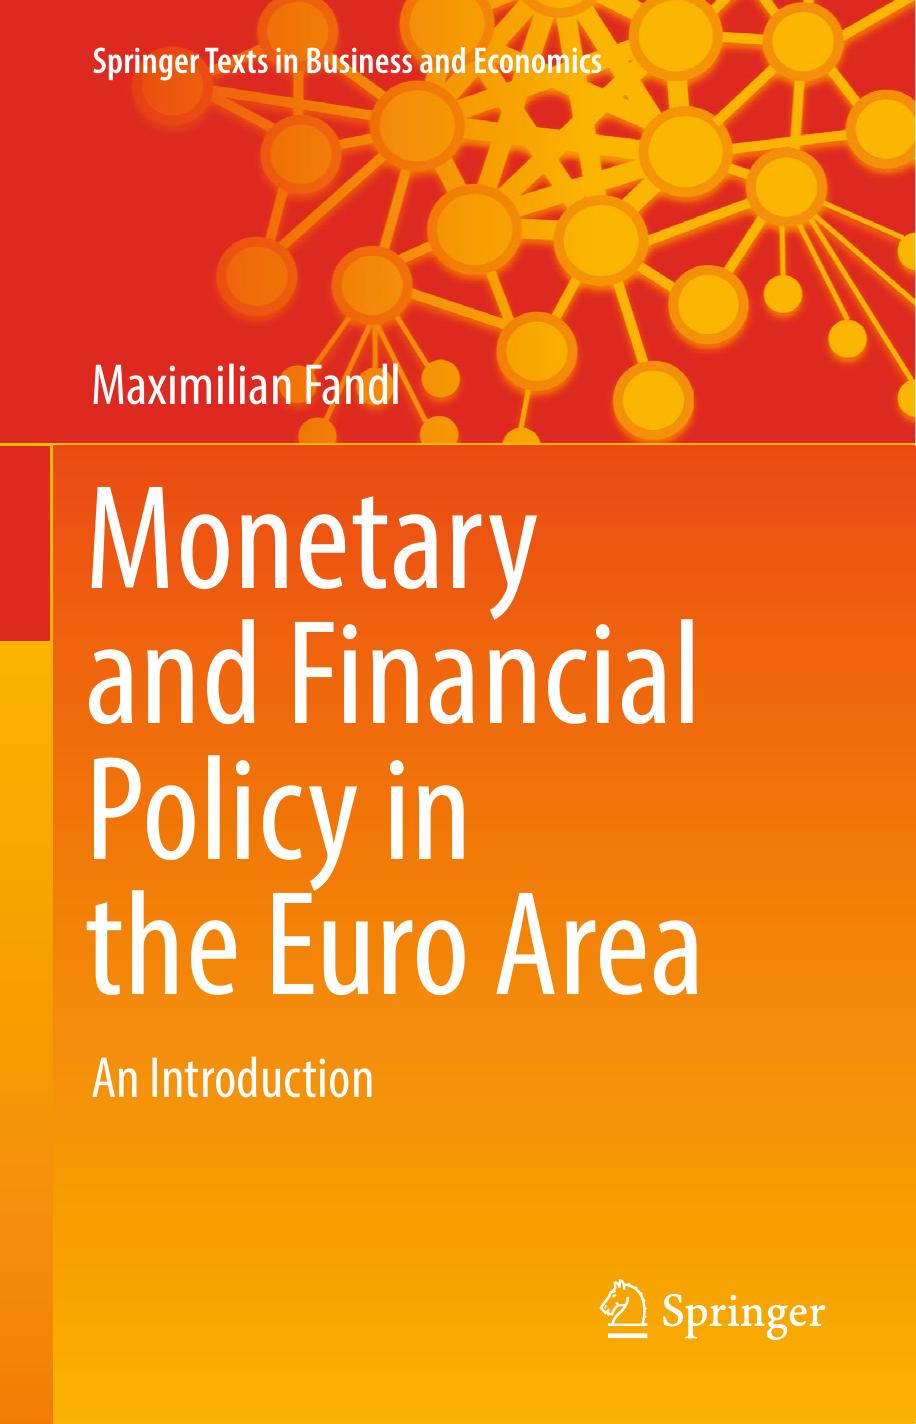 Monetary and Financial Policy in the Euro Area-Springer International Publishing 2018